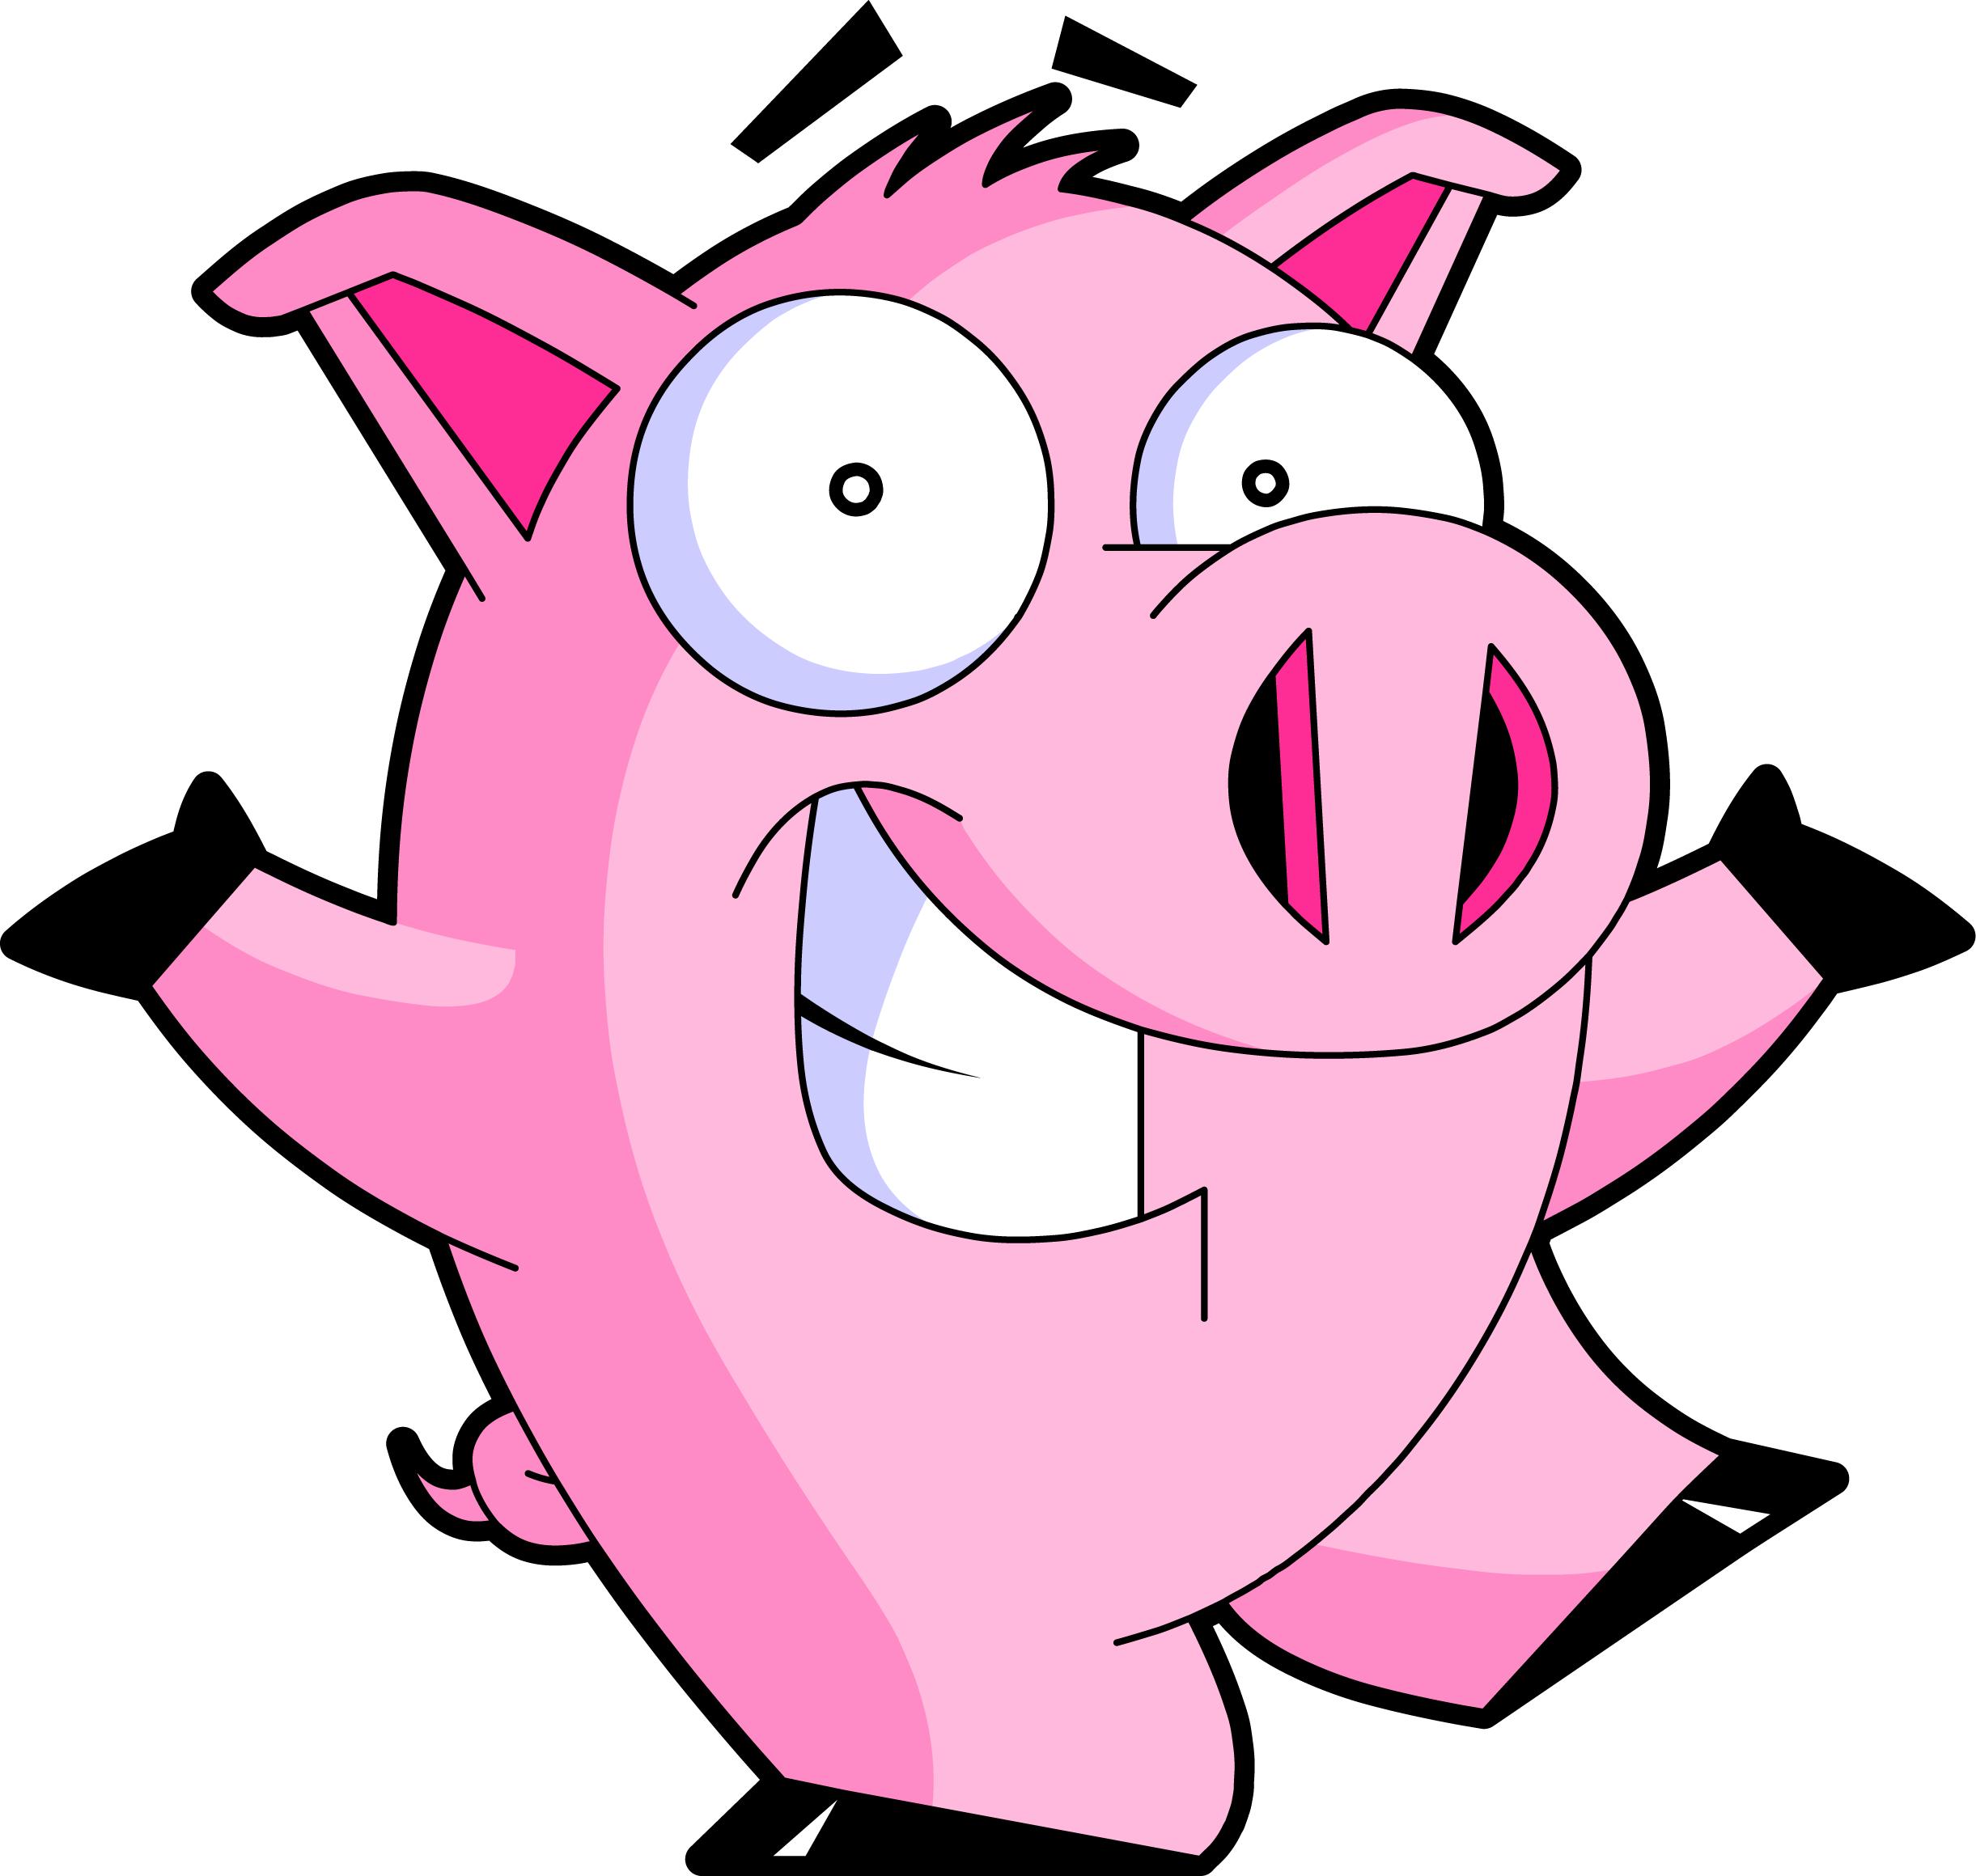 Cartoon Picture Of A Pig - ClipArt Best